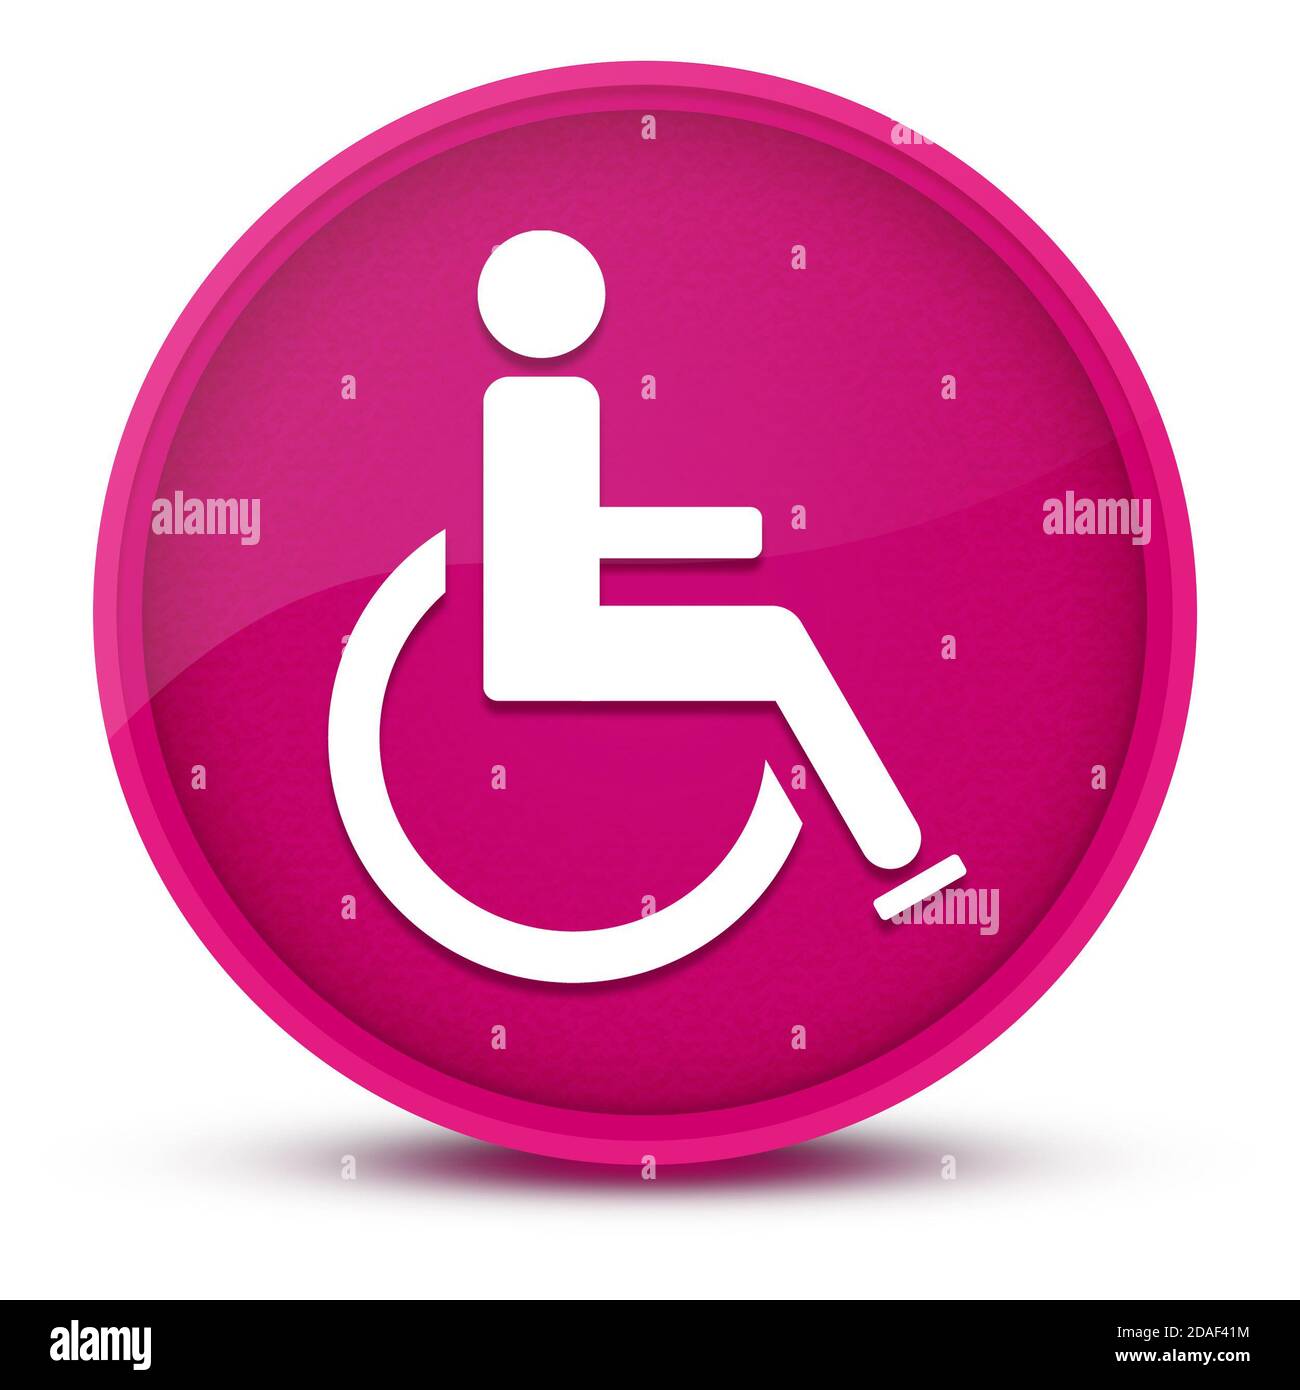 Wheelchair handicap luxurious glossy pink round button abstract illustration Stock Photo